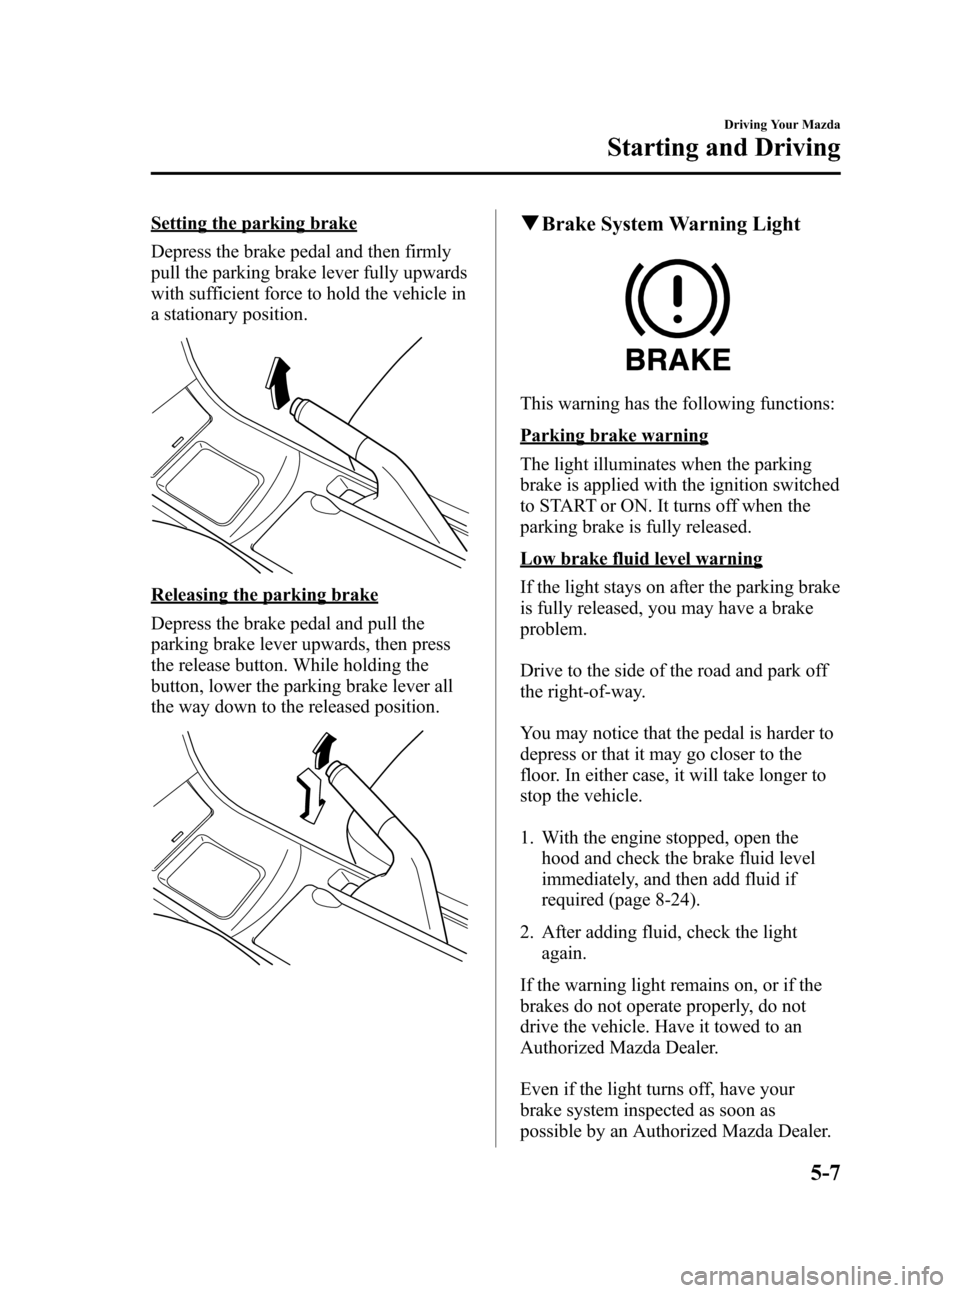 MAZDA MODEL 3 HATCHBACK 2012   (in English) Service Manual Black plate (169,1)
Setting the parking brake
Depress the brake pedal and then firmly
pull the parking brake lever fully upwards
with sufficient force to hold the vehicle in
a stationary position.
Rel